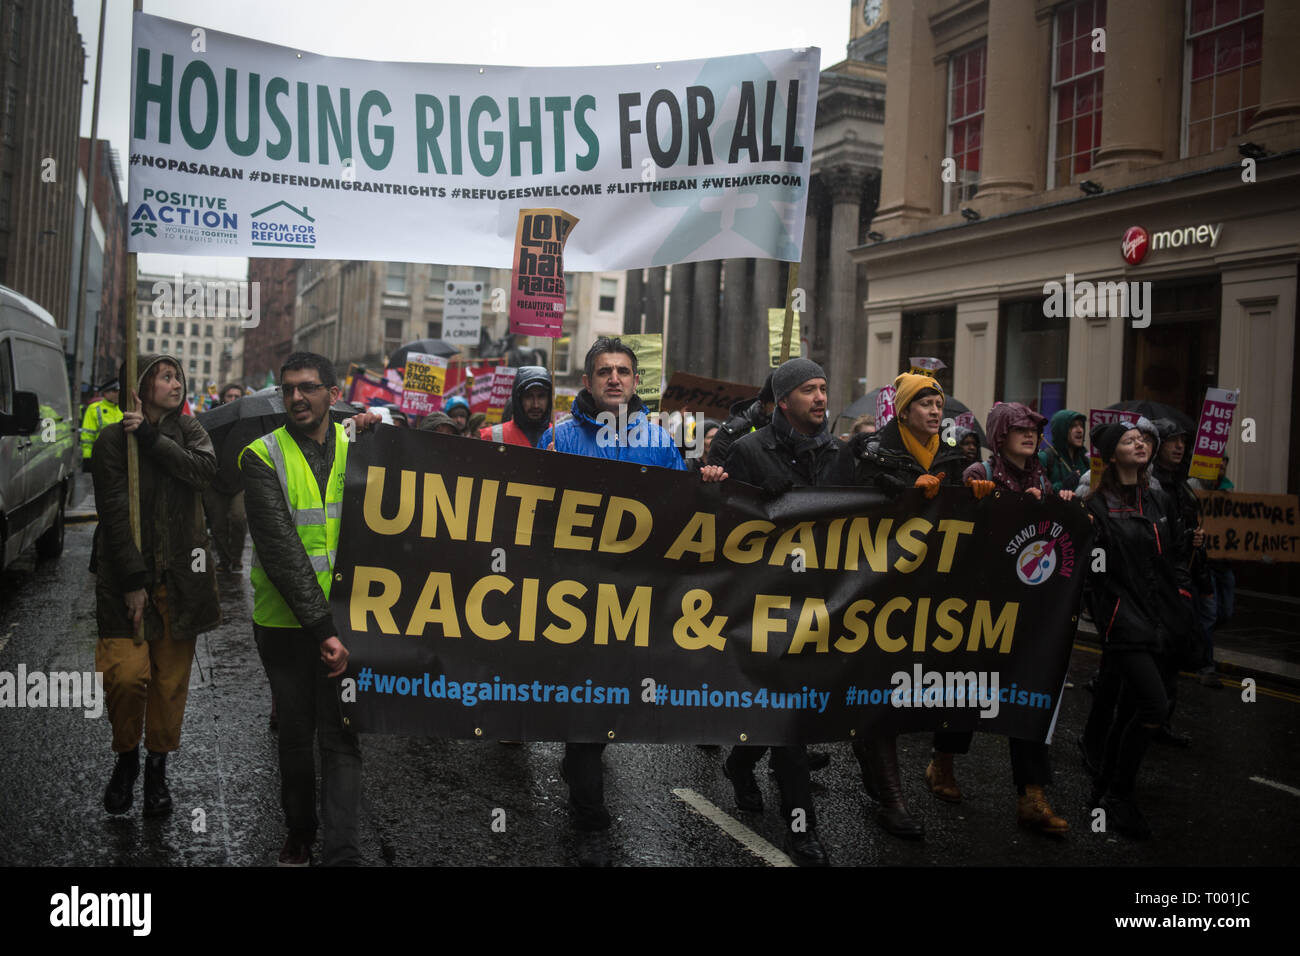 Glasgow, Scotland, 16th March 2019. Pro-Palestine and Pro-Israel groups meet at an Anti-racism rally in George Square, in Glasgow, Scotland, 16 March 2019.  Photo by: Jeremy Sutton-Hibbert/Alamy Live News. Stock Photo